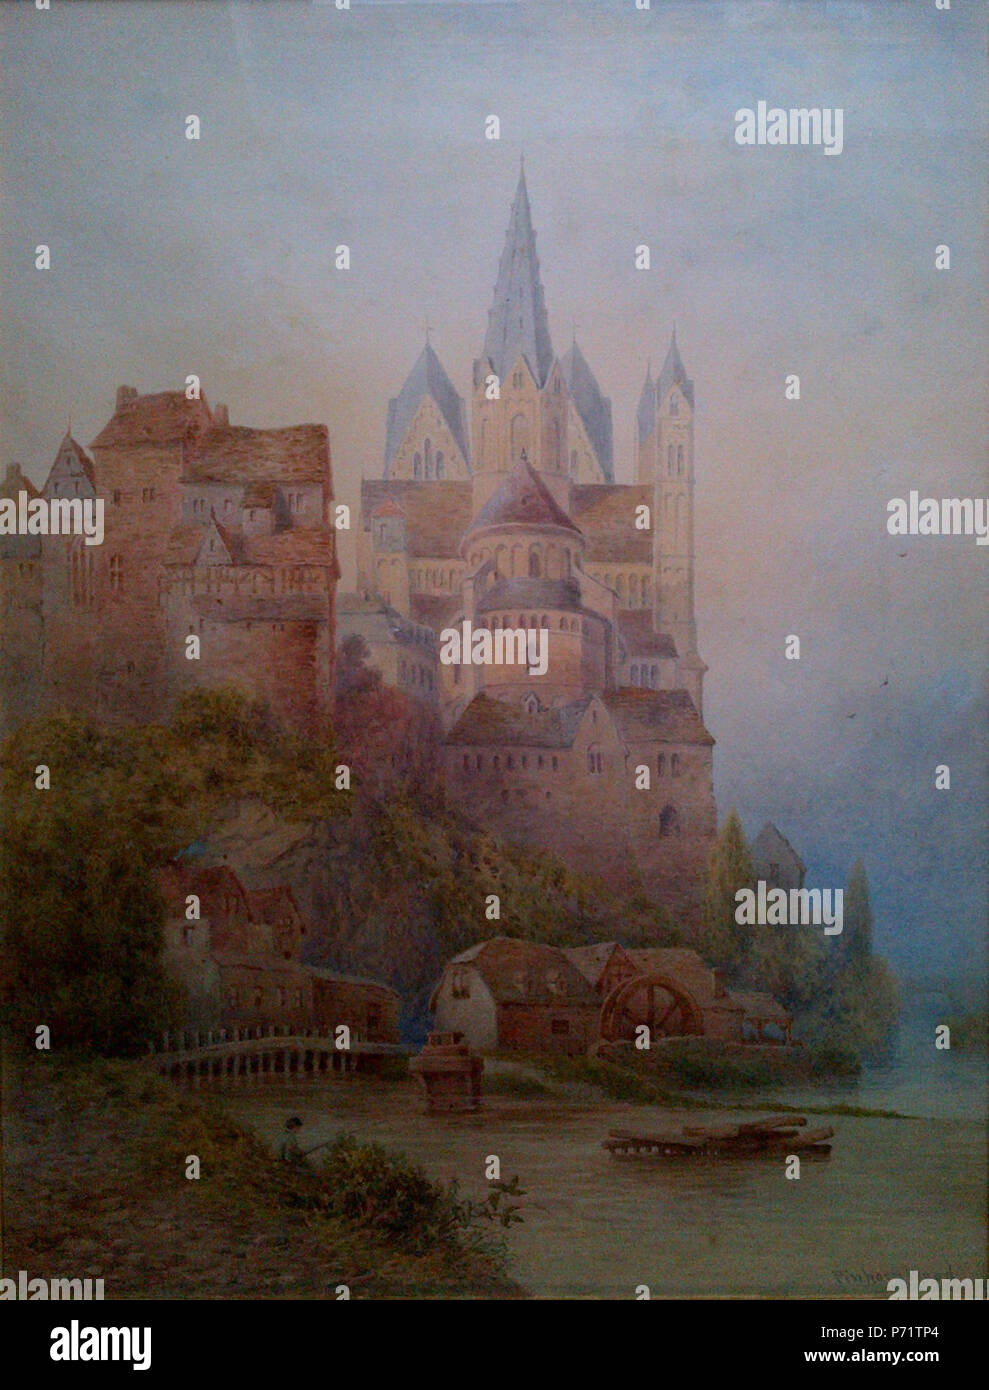 English: This watercolour painting portrays Limburg cathedral and Limburg schloss beside the Lahn River. It measures 26x19 inches. It is believed that Mr Wood painted it on a trip to the continent in 1892. His father, Lewis John Wood (1813-1901), built his painting career on scenes of Northern European city life, and is known to have painted in Limburg. Mr Wood painted this picture prior to his death in 1918 53 Limburg an der Lahn (undated) by Lewis Pinhorn Wood Stock Photo